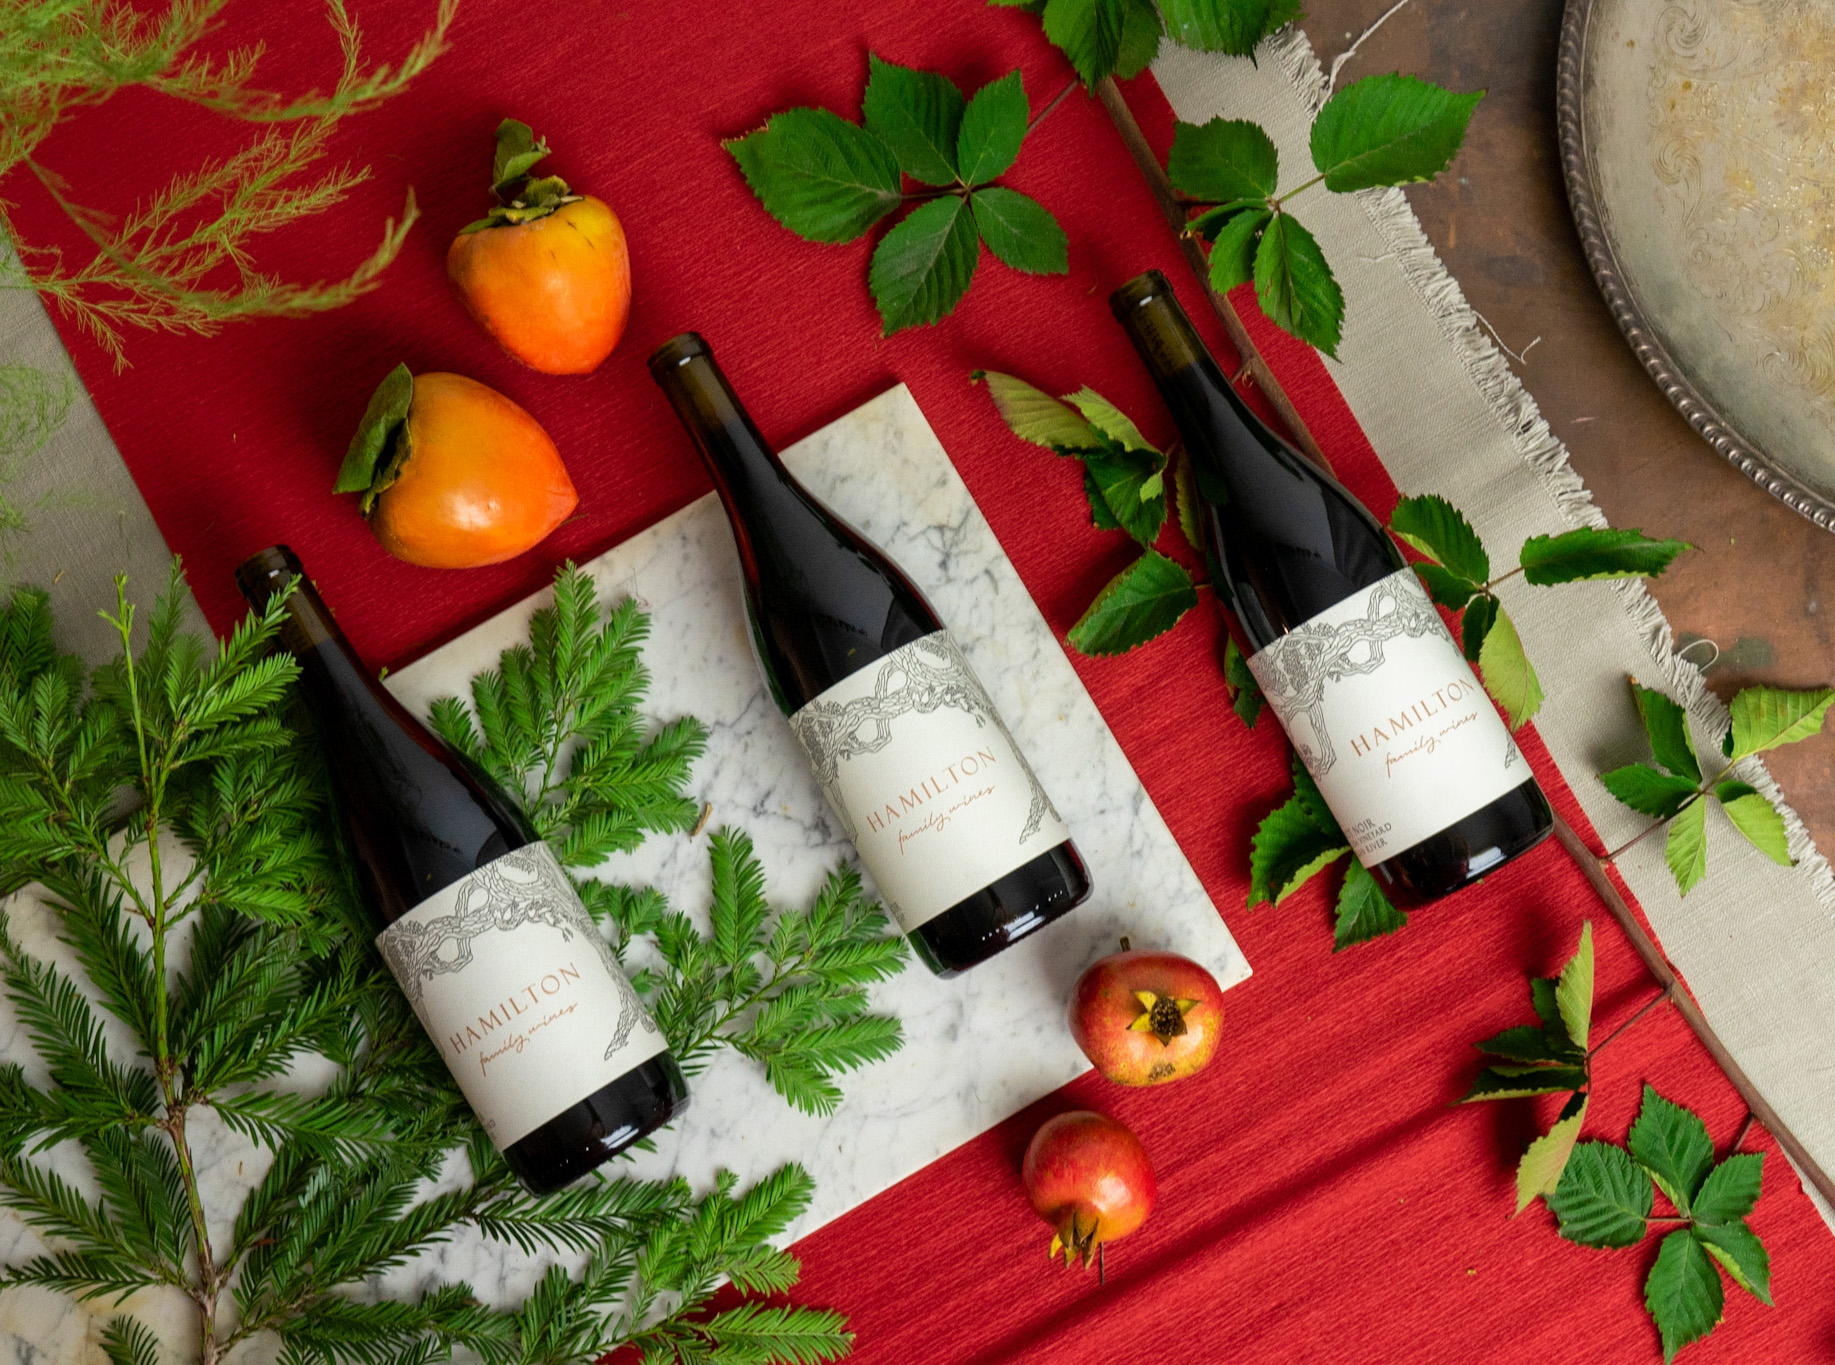 A photograph of a gift pack for Hamilton Family wines